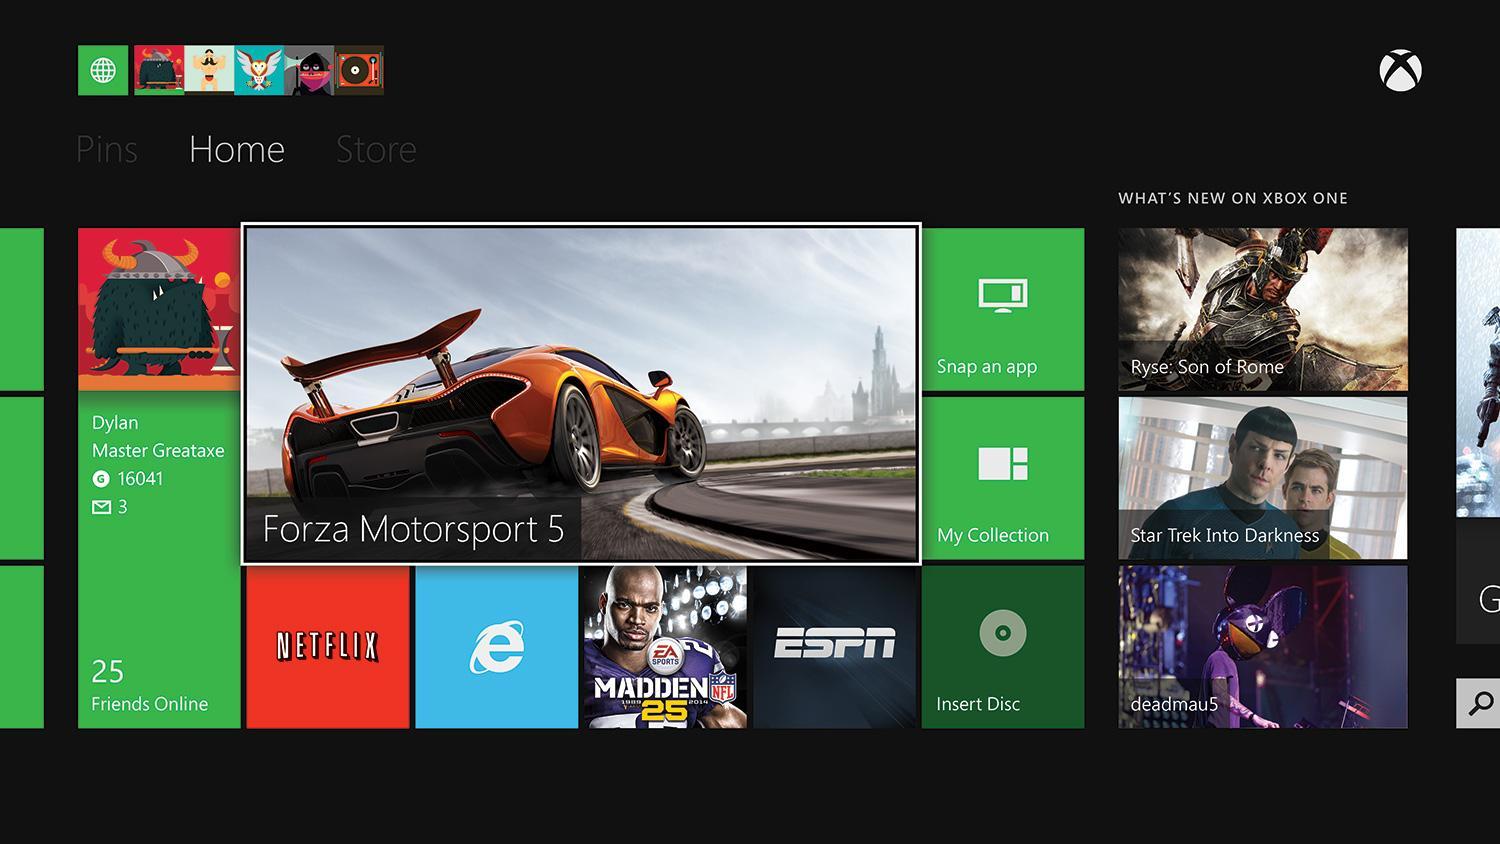 Porn on the Xbox One, PS4 | Digital Trends